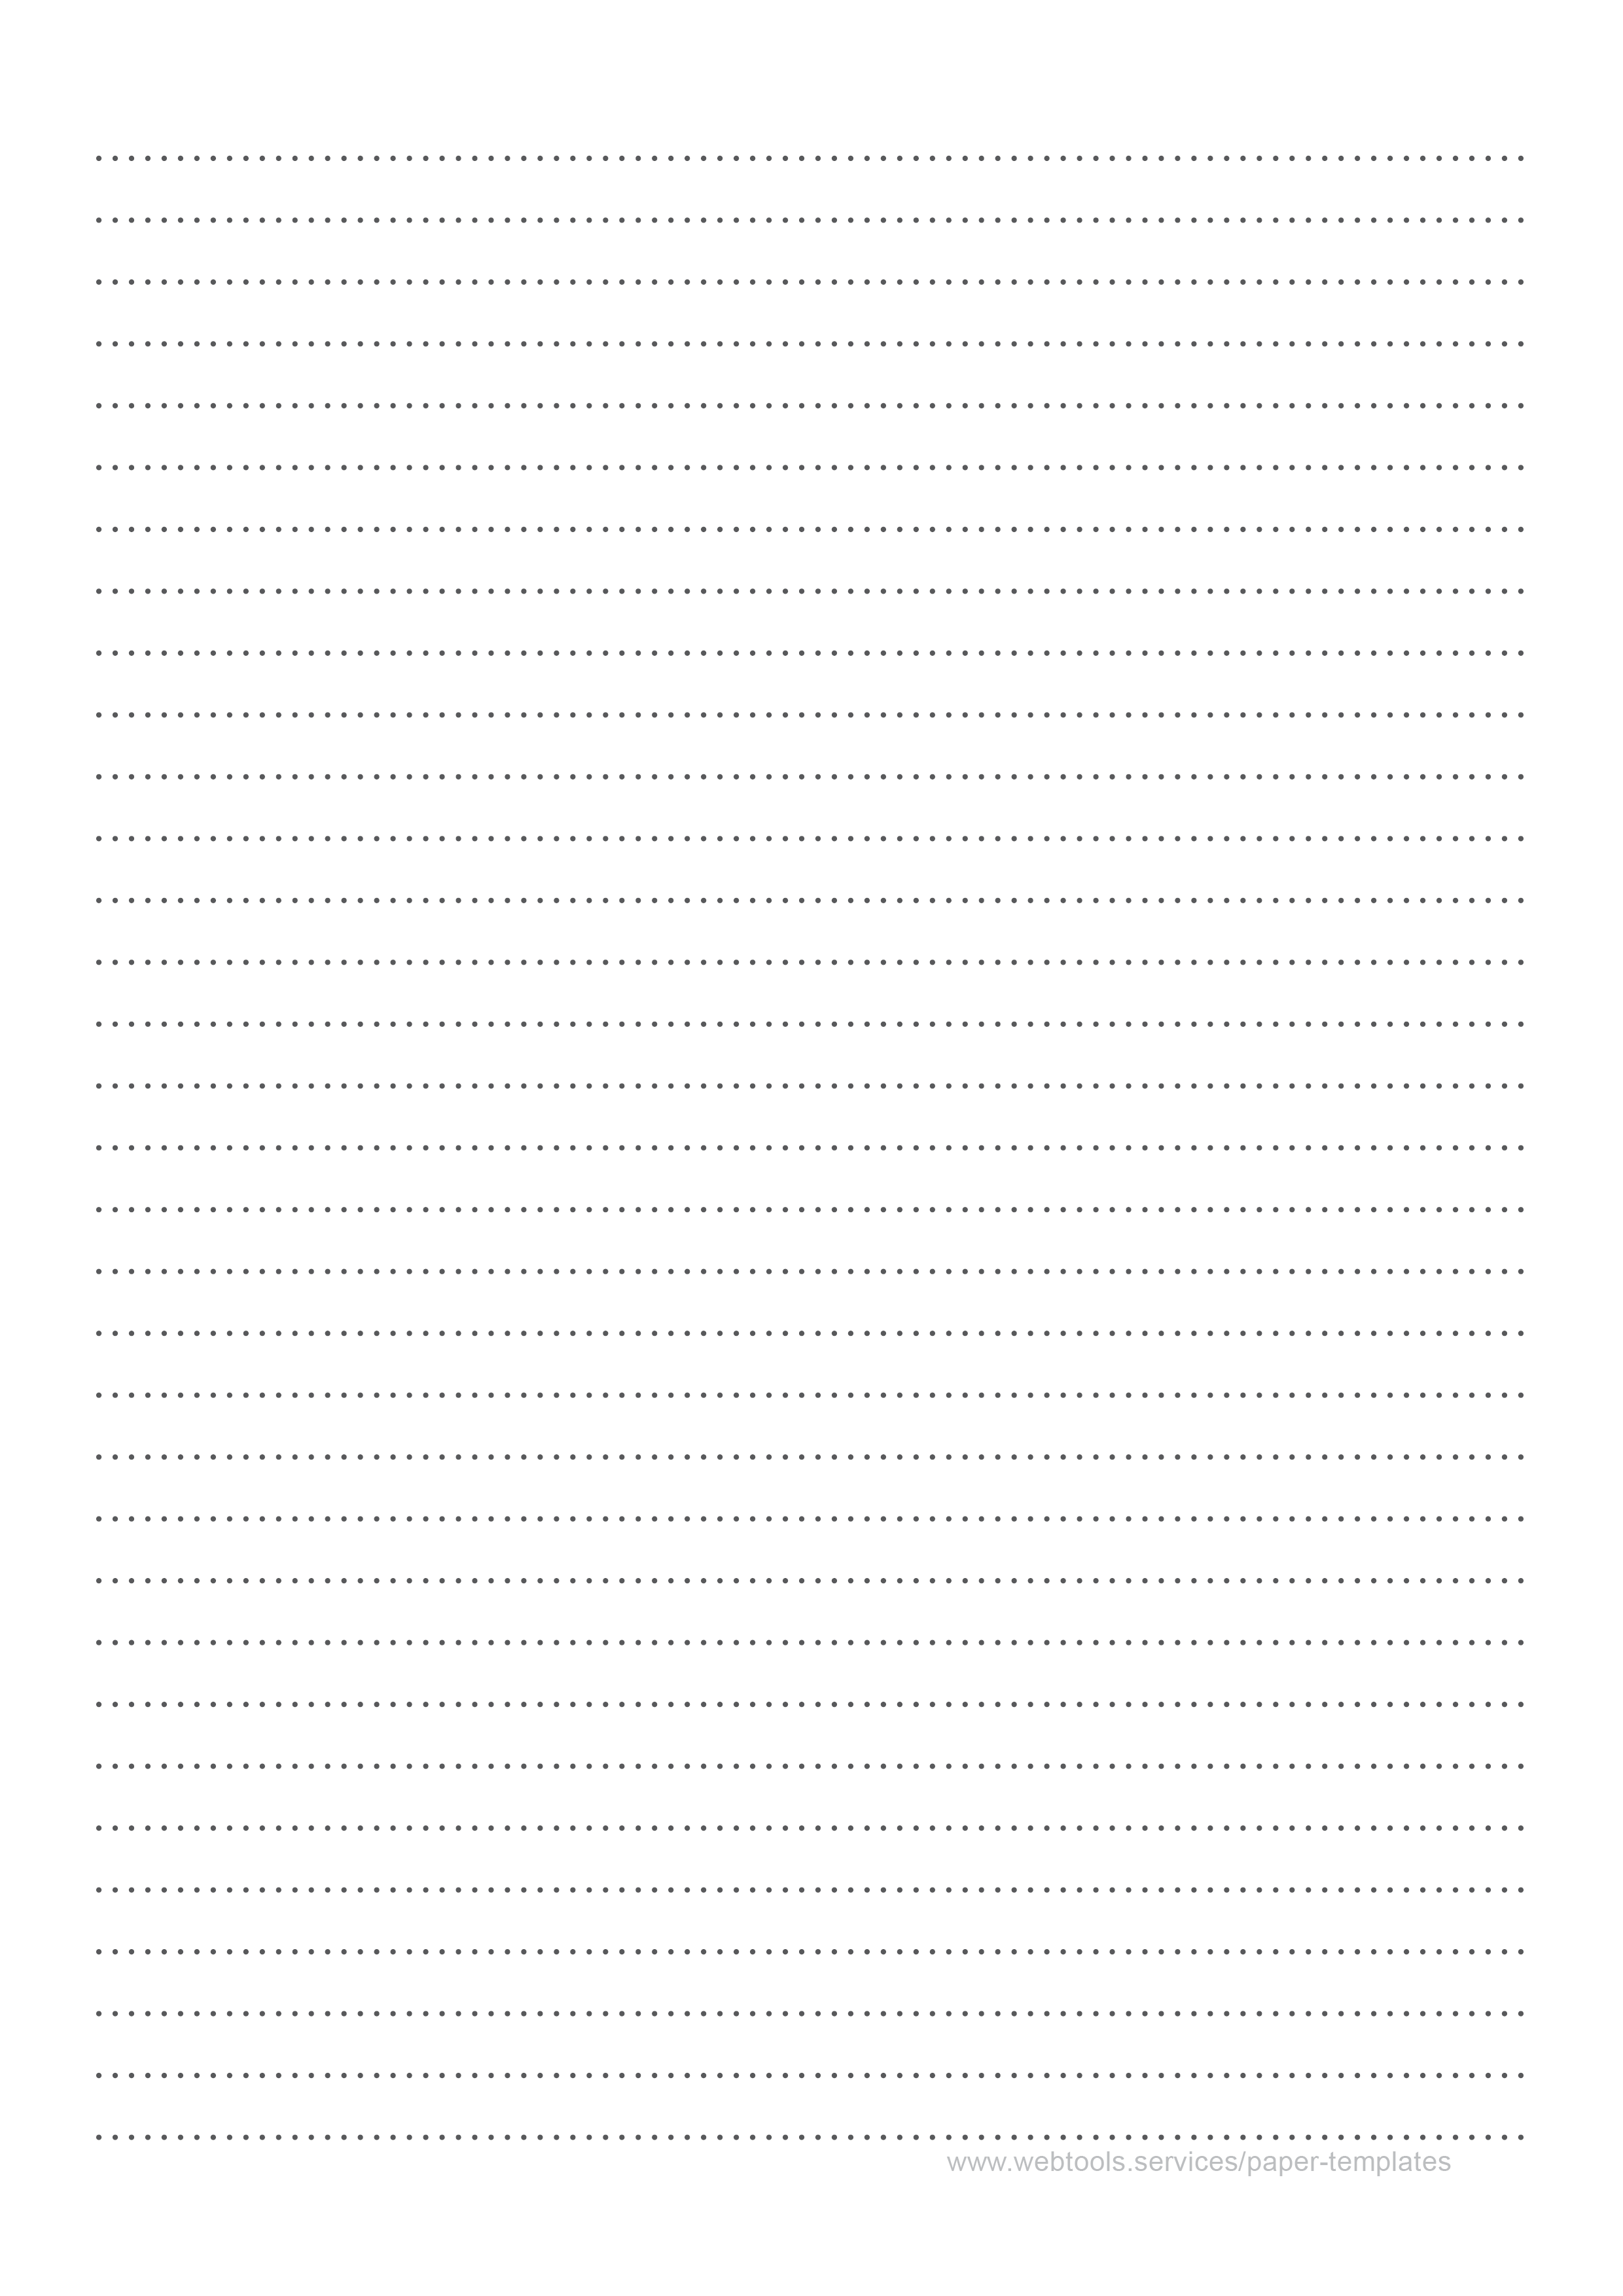 Dotted Black Lined Paper Template With 8 mm Line Height